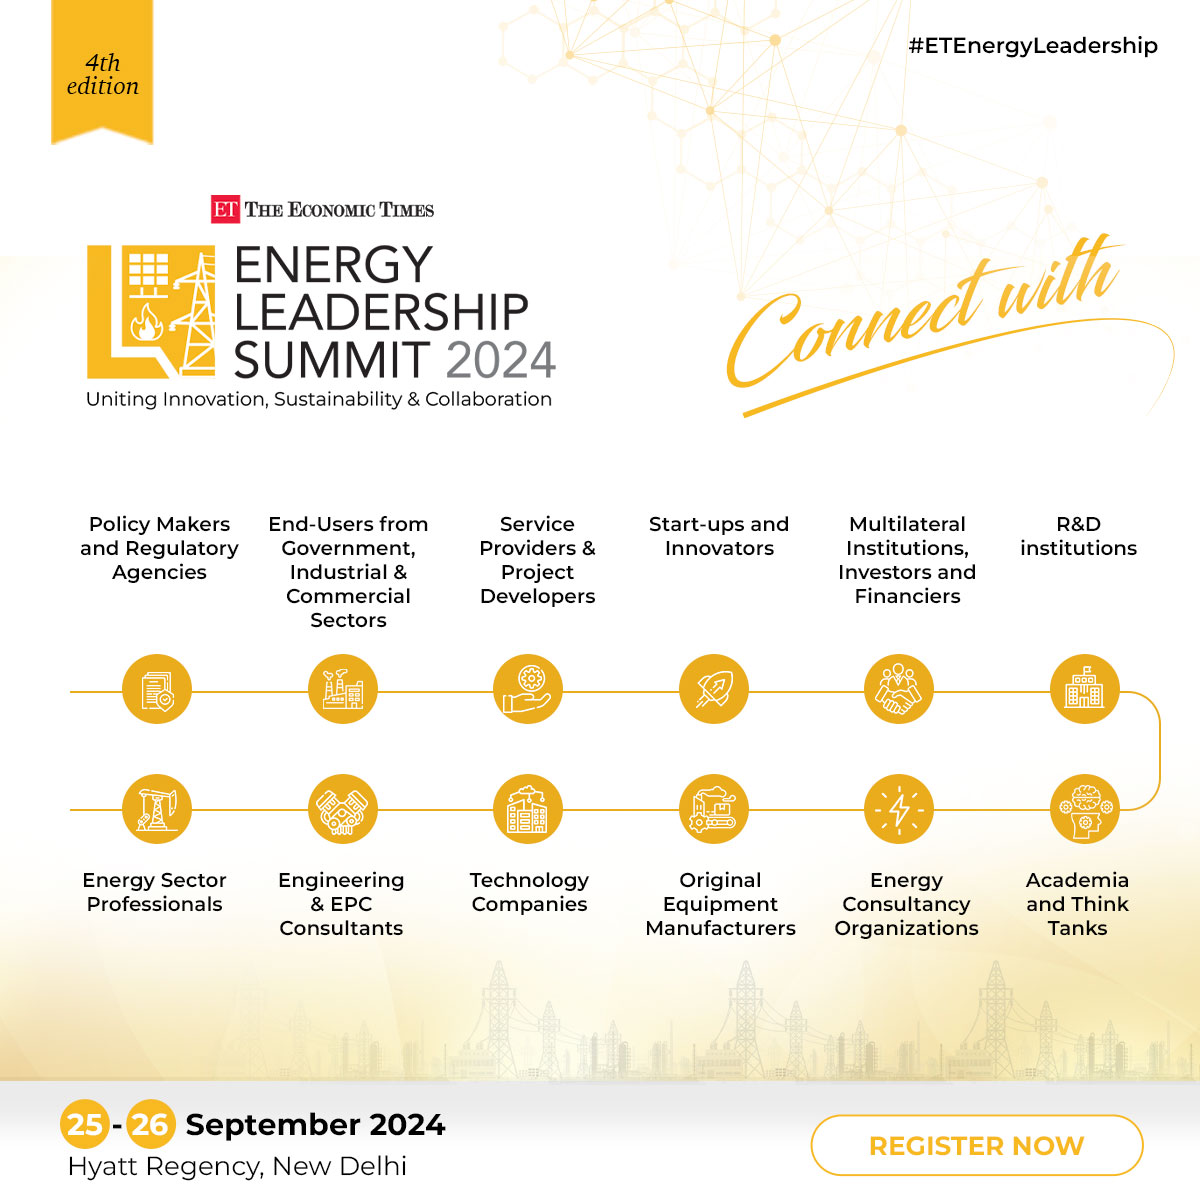 Connect with top leaders, industry experts, and policymakers at The ET Energy Leadership Summit. Dive into discussions on future energy roadmaps, explore the latest innovations, and network with professionals. Register Now: bit.ly/3JFRjHl #ETEnergyLeadership